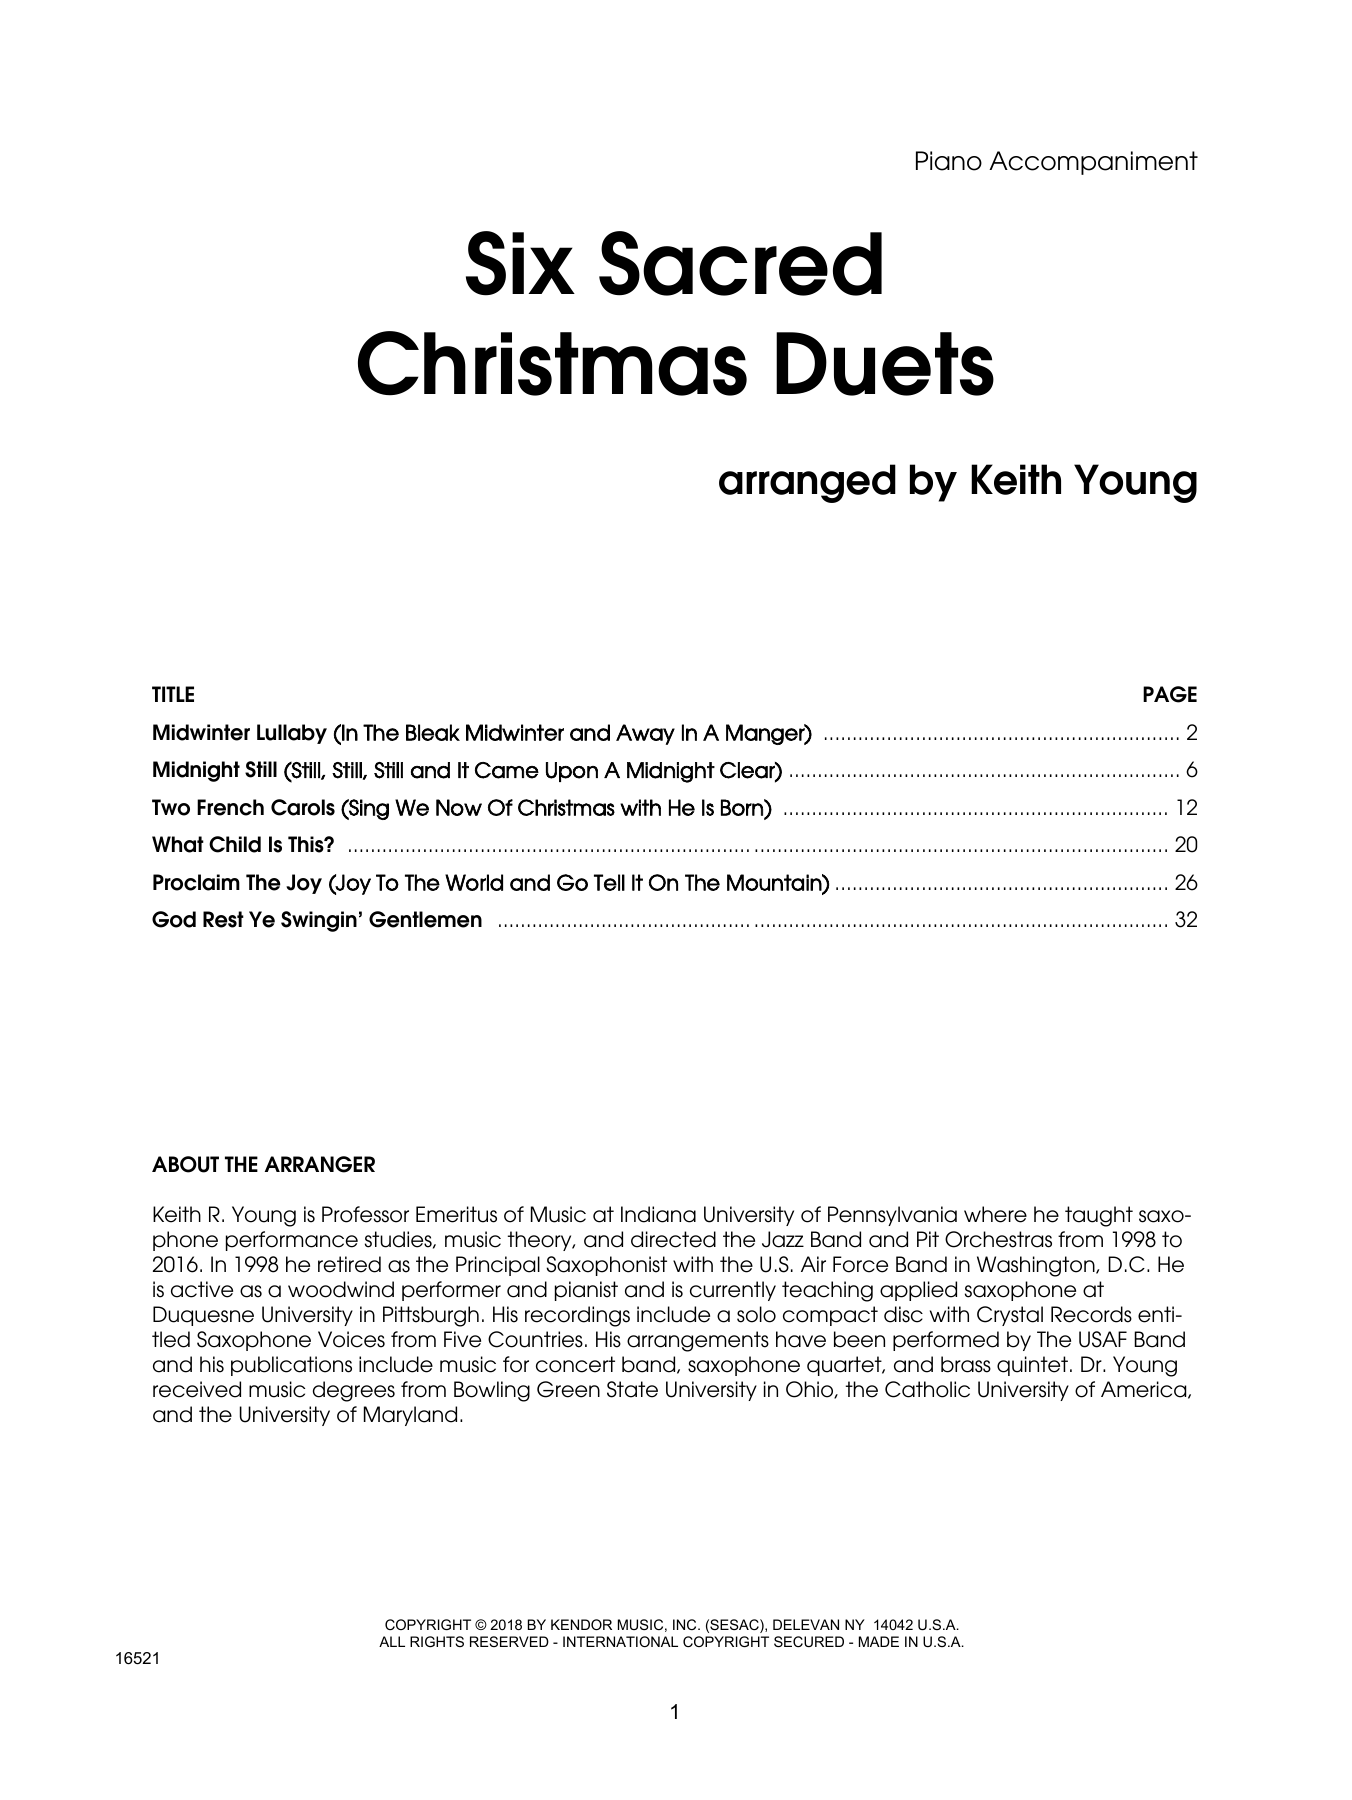 Download Keith Young Six Sacred Christmas Duets - Piano Acco Sheet Music